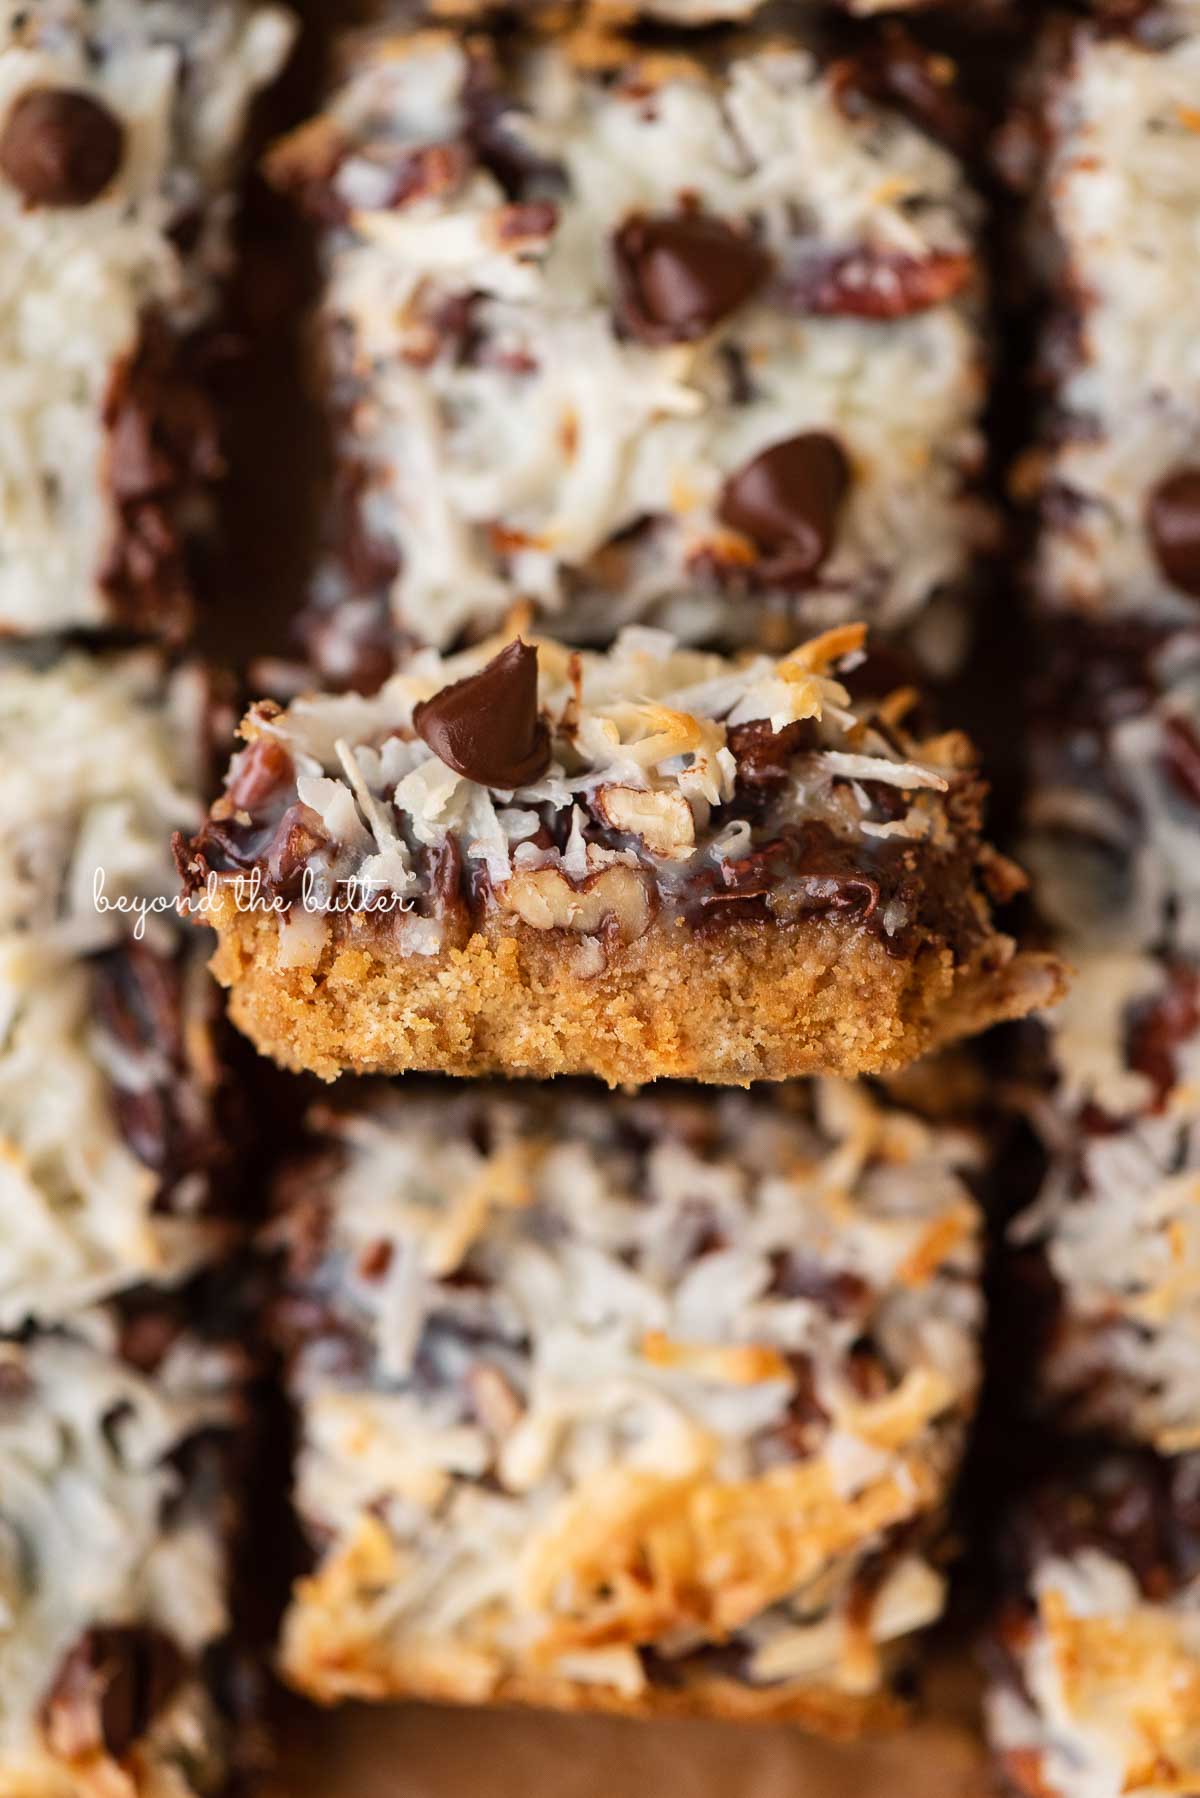 Sliced 7 layer magic cookie bars with center bar on its side | © Beyond the Butter®